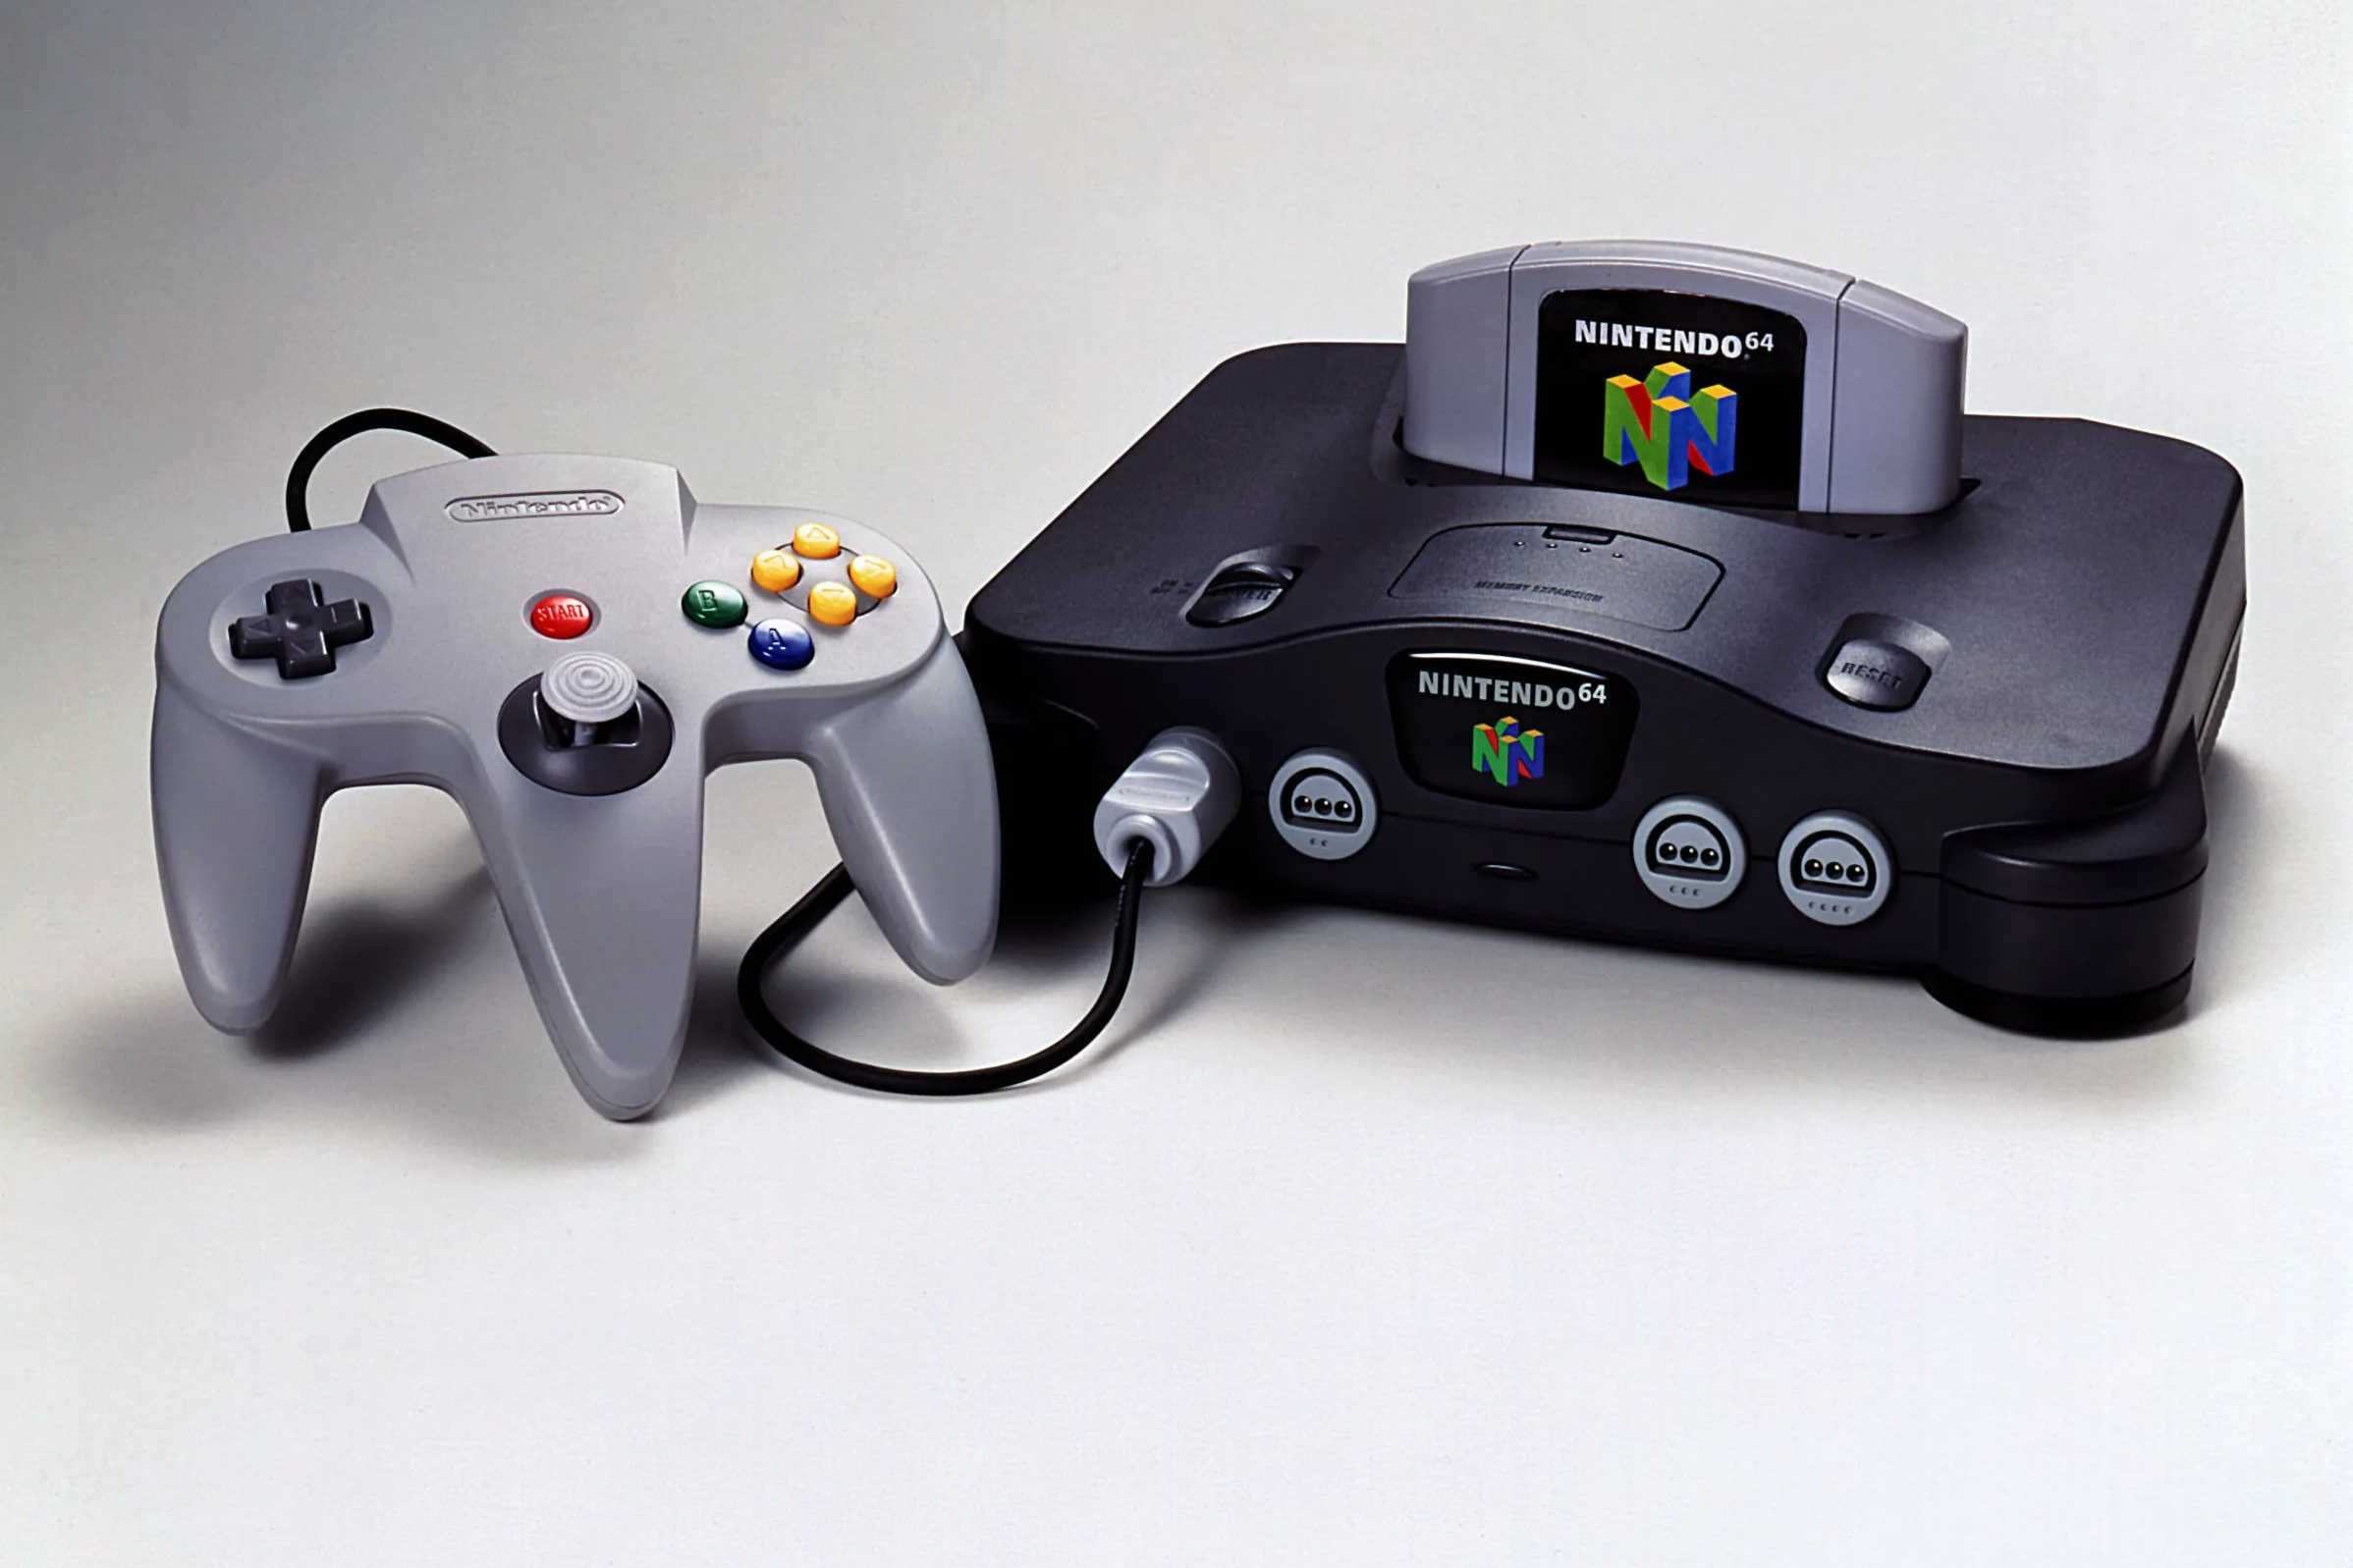 How Well Do You Know The Nintendo 64?